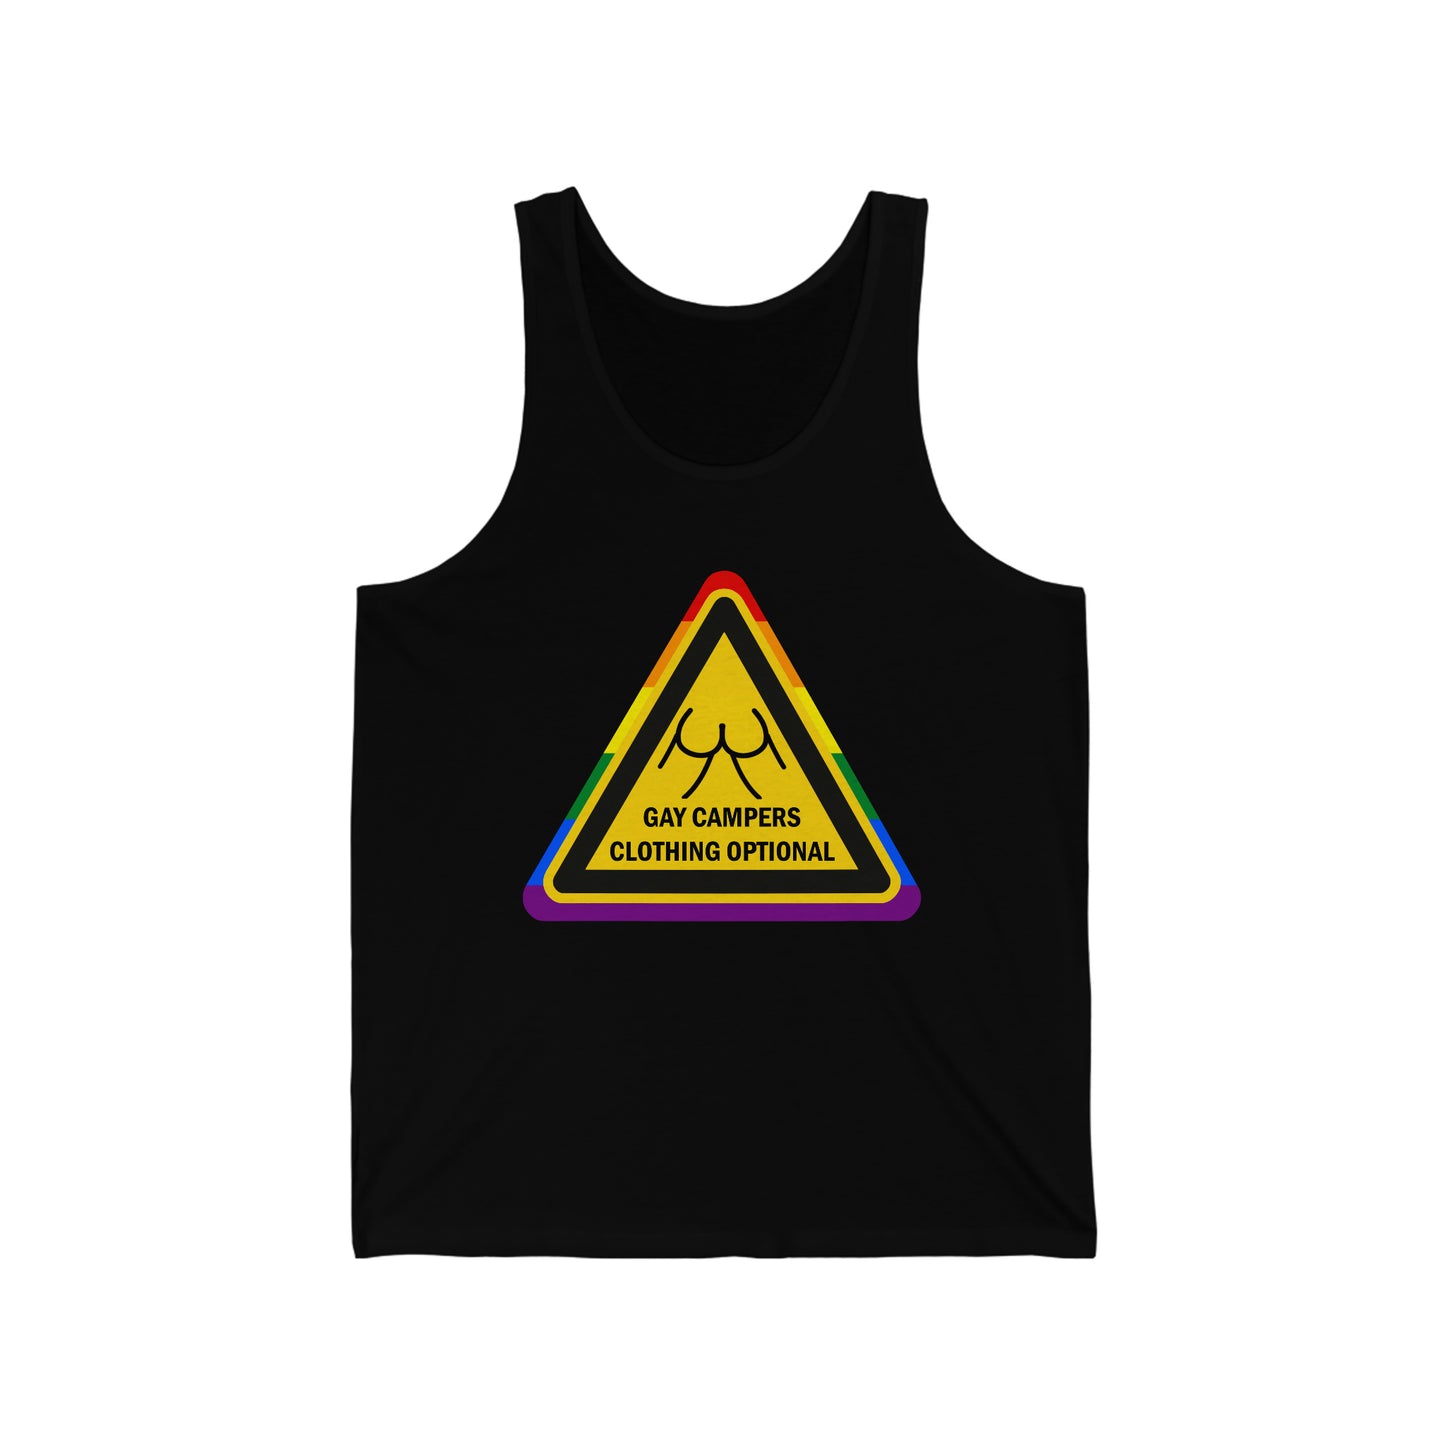 Gay Campers - Clothing Optional Warning Sign Adult Unisex Tank Top